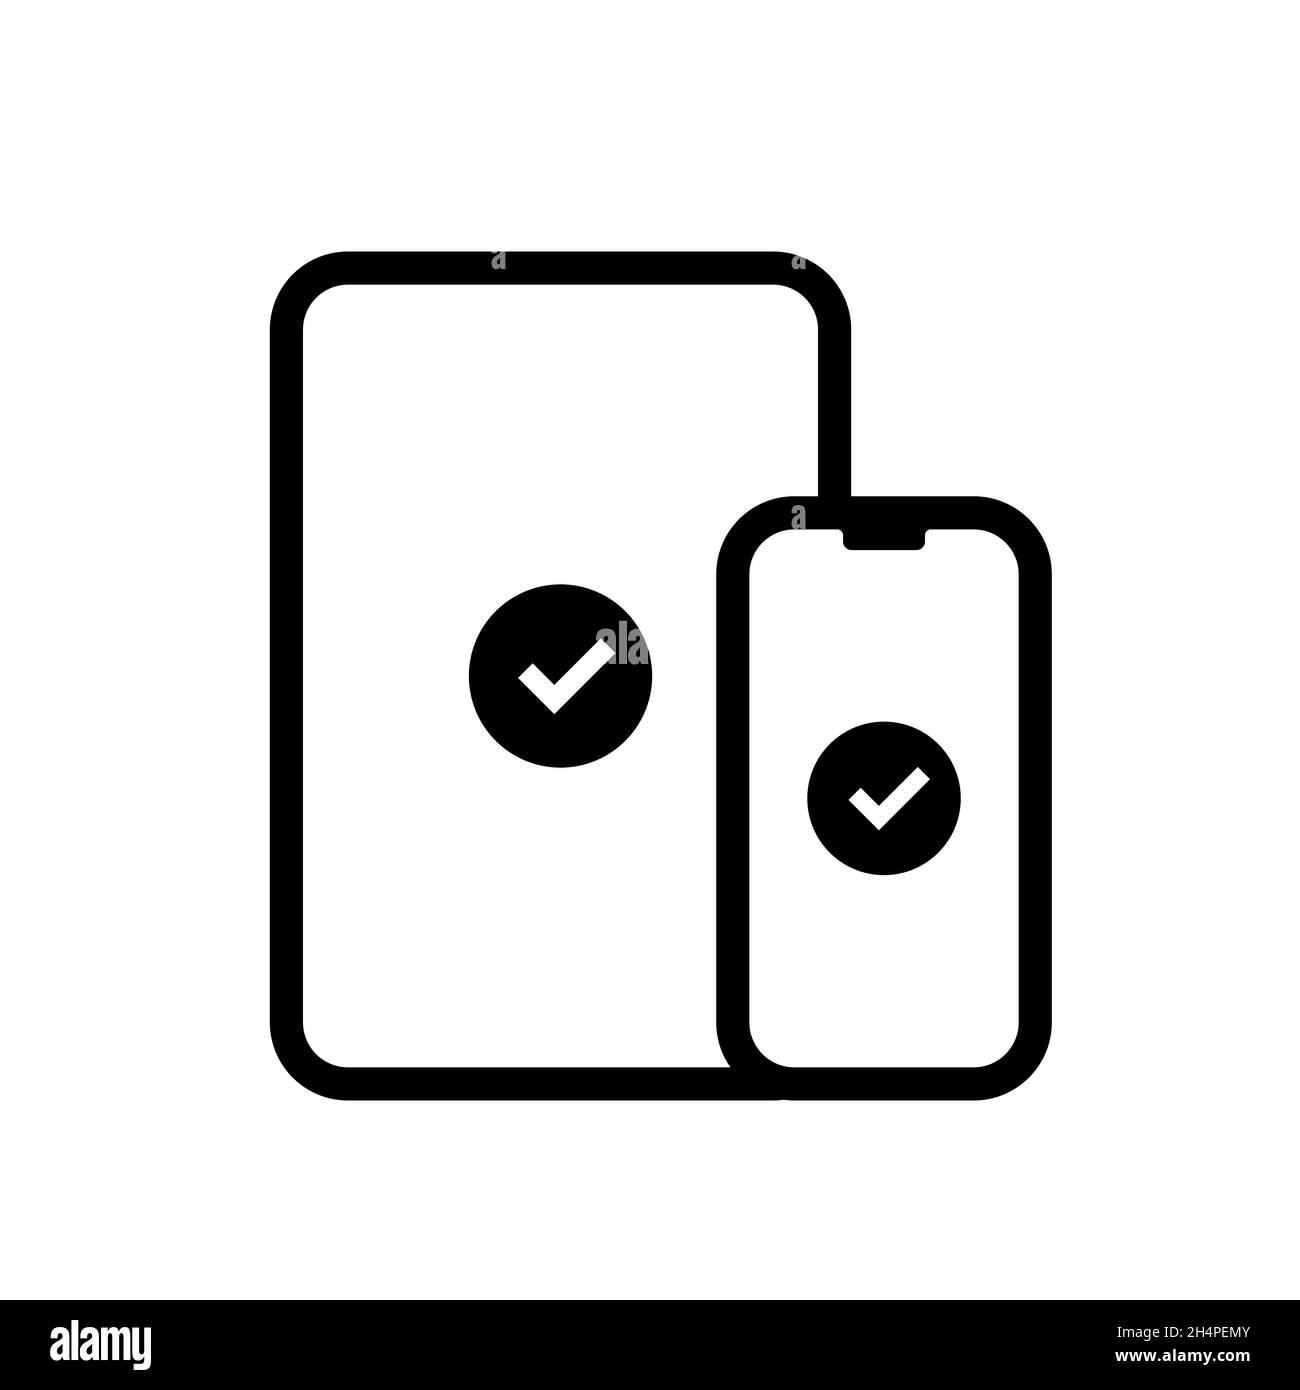 Smartphone and tablet with checkmark icon. Vector EPS 10. Isolated on white background. Stock Vector